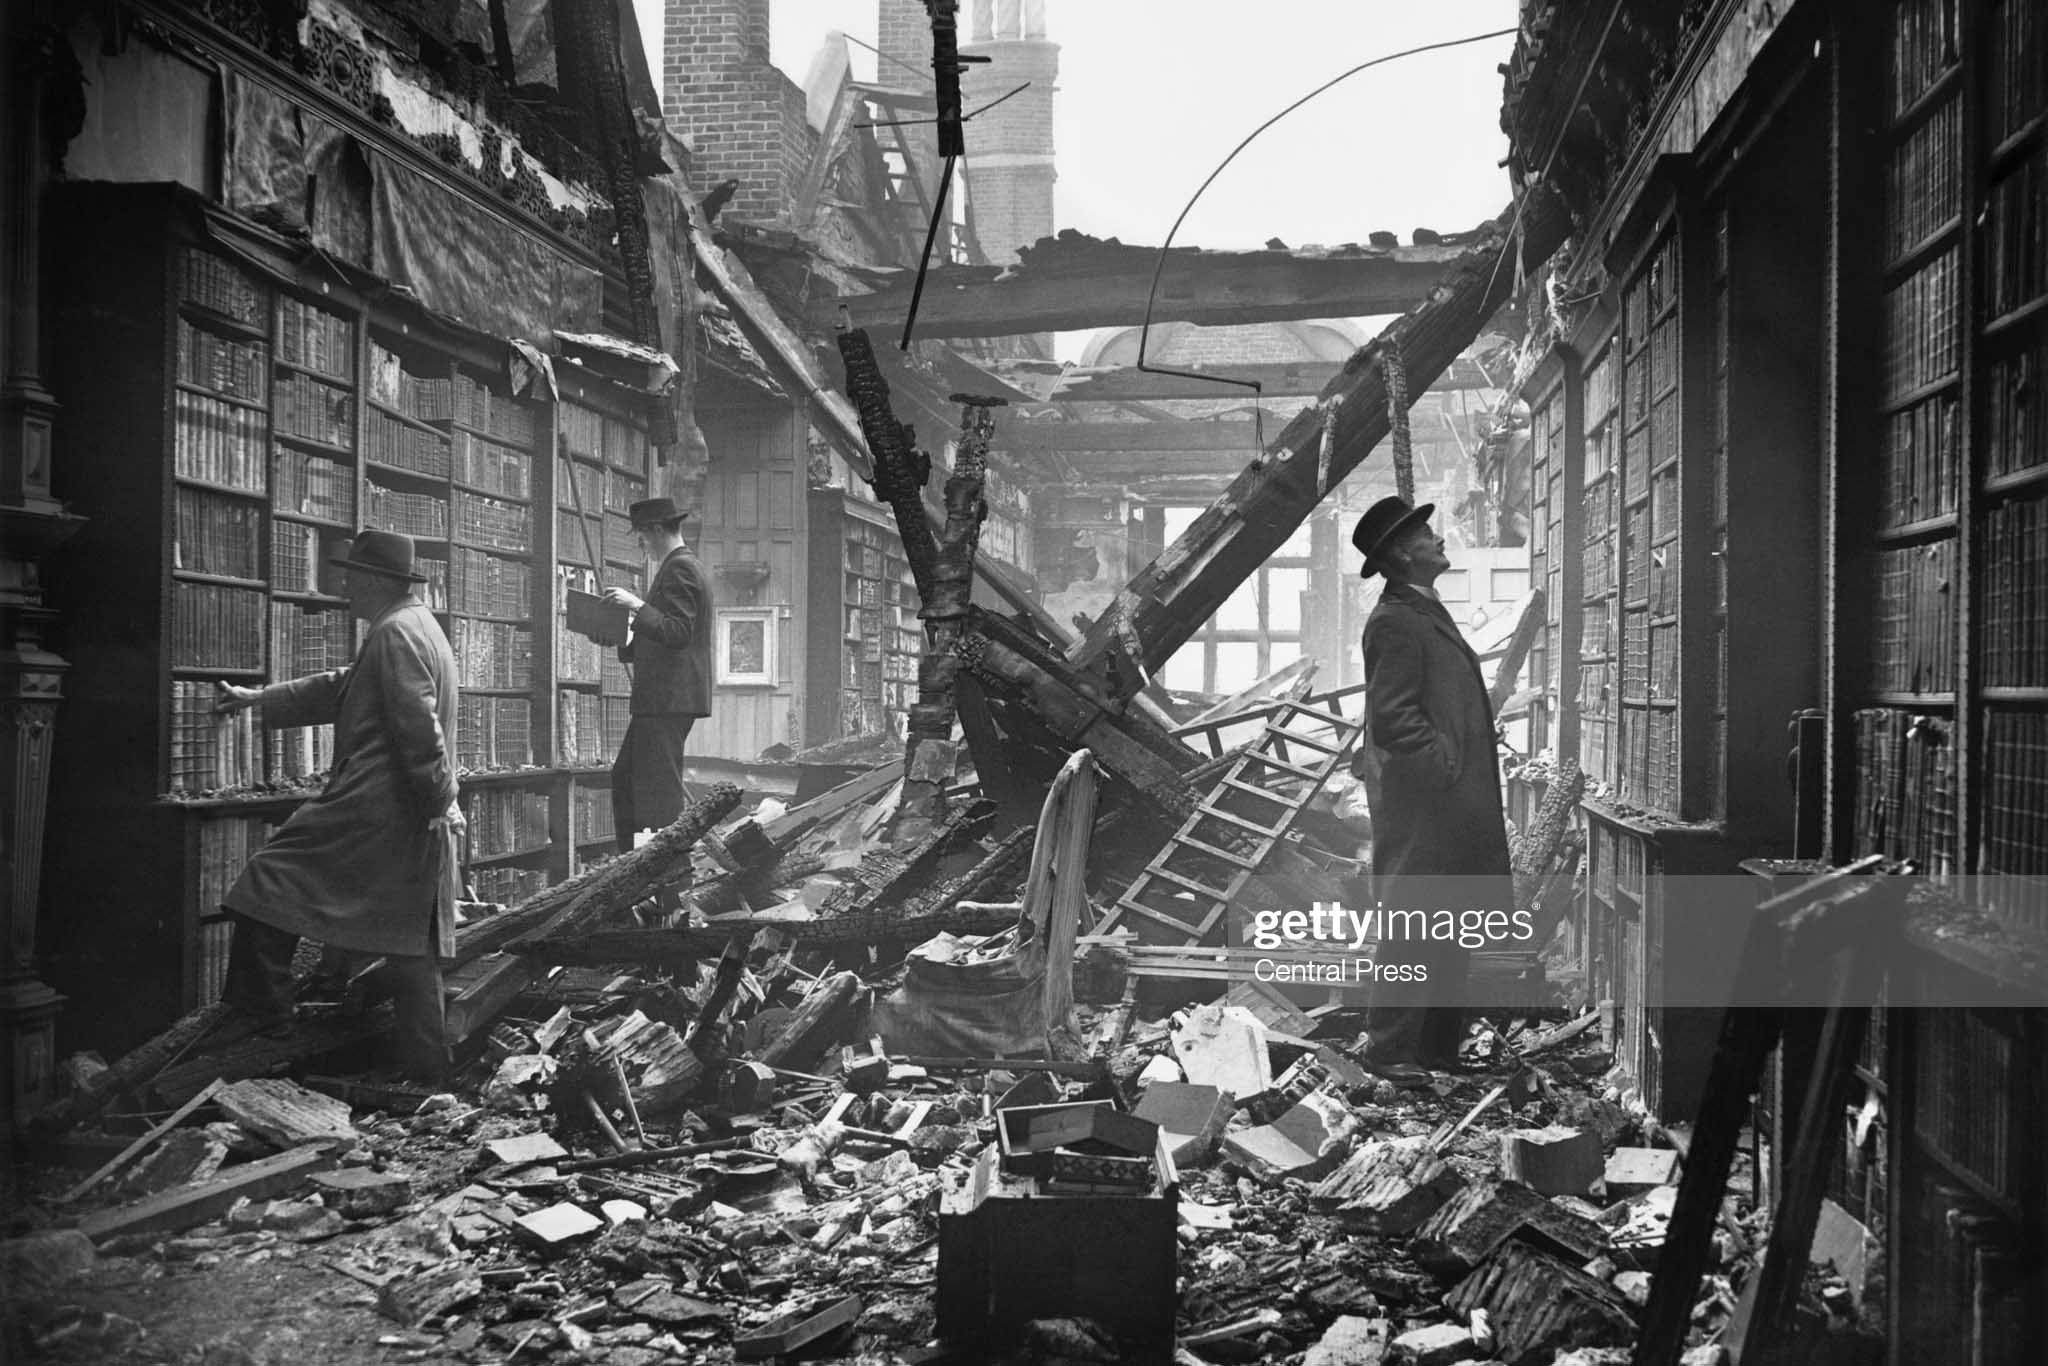 The library at Holland House in Kensington, London, extensively damaged by a Molotov 'Breadbasket' fire bomb, 23rd October 1940. (Photo by Central Press/Hulton Archive/Getty Images)